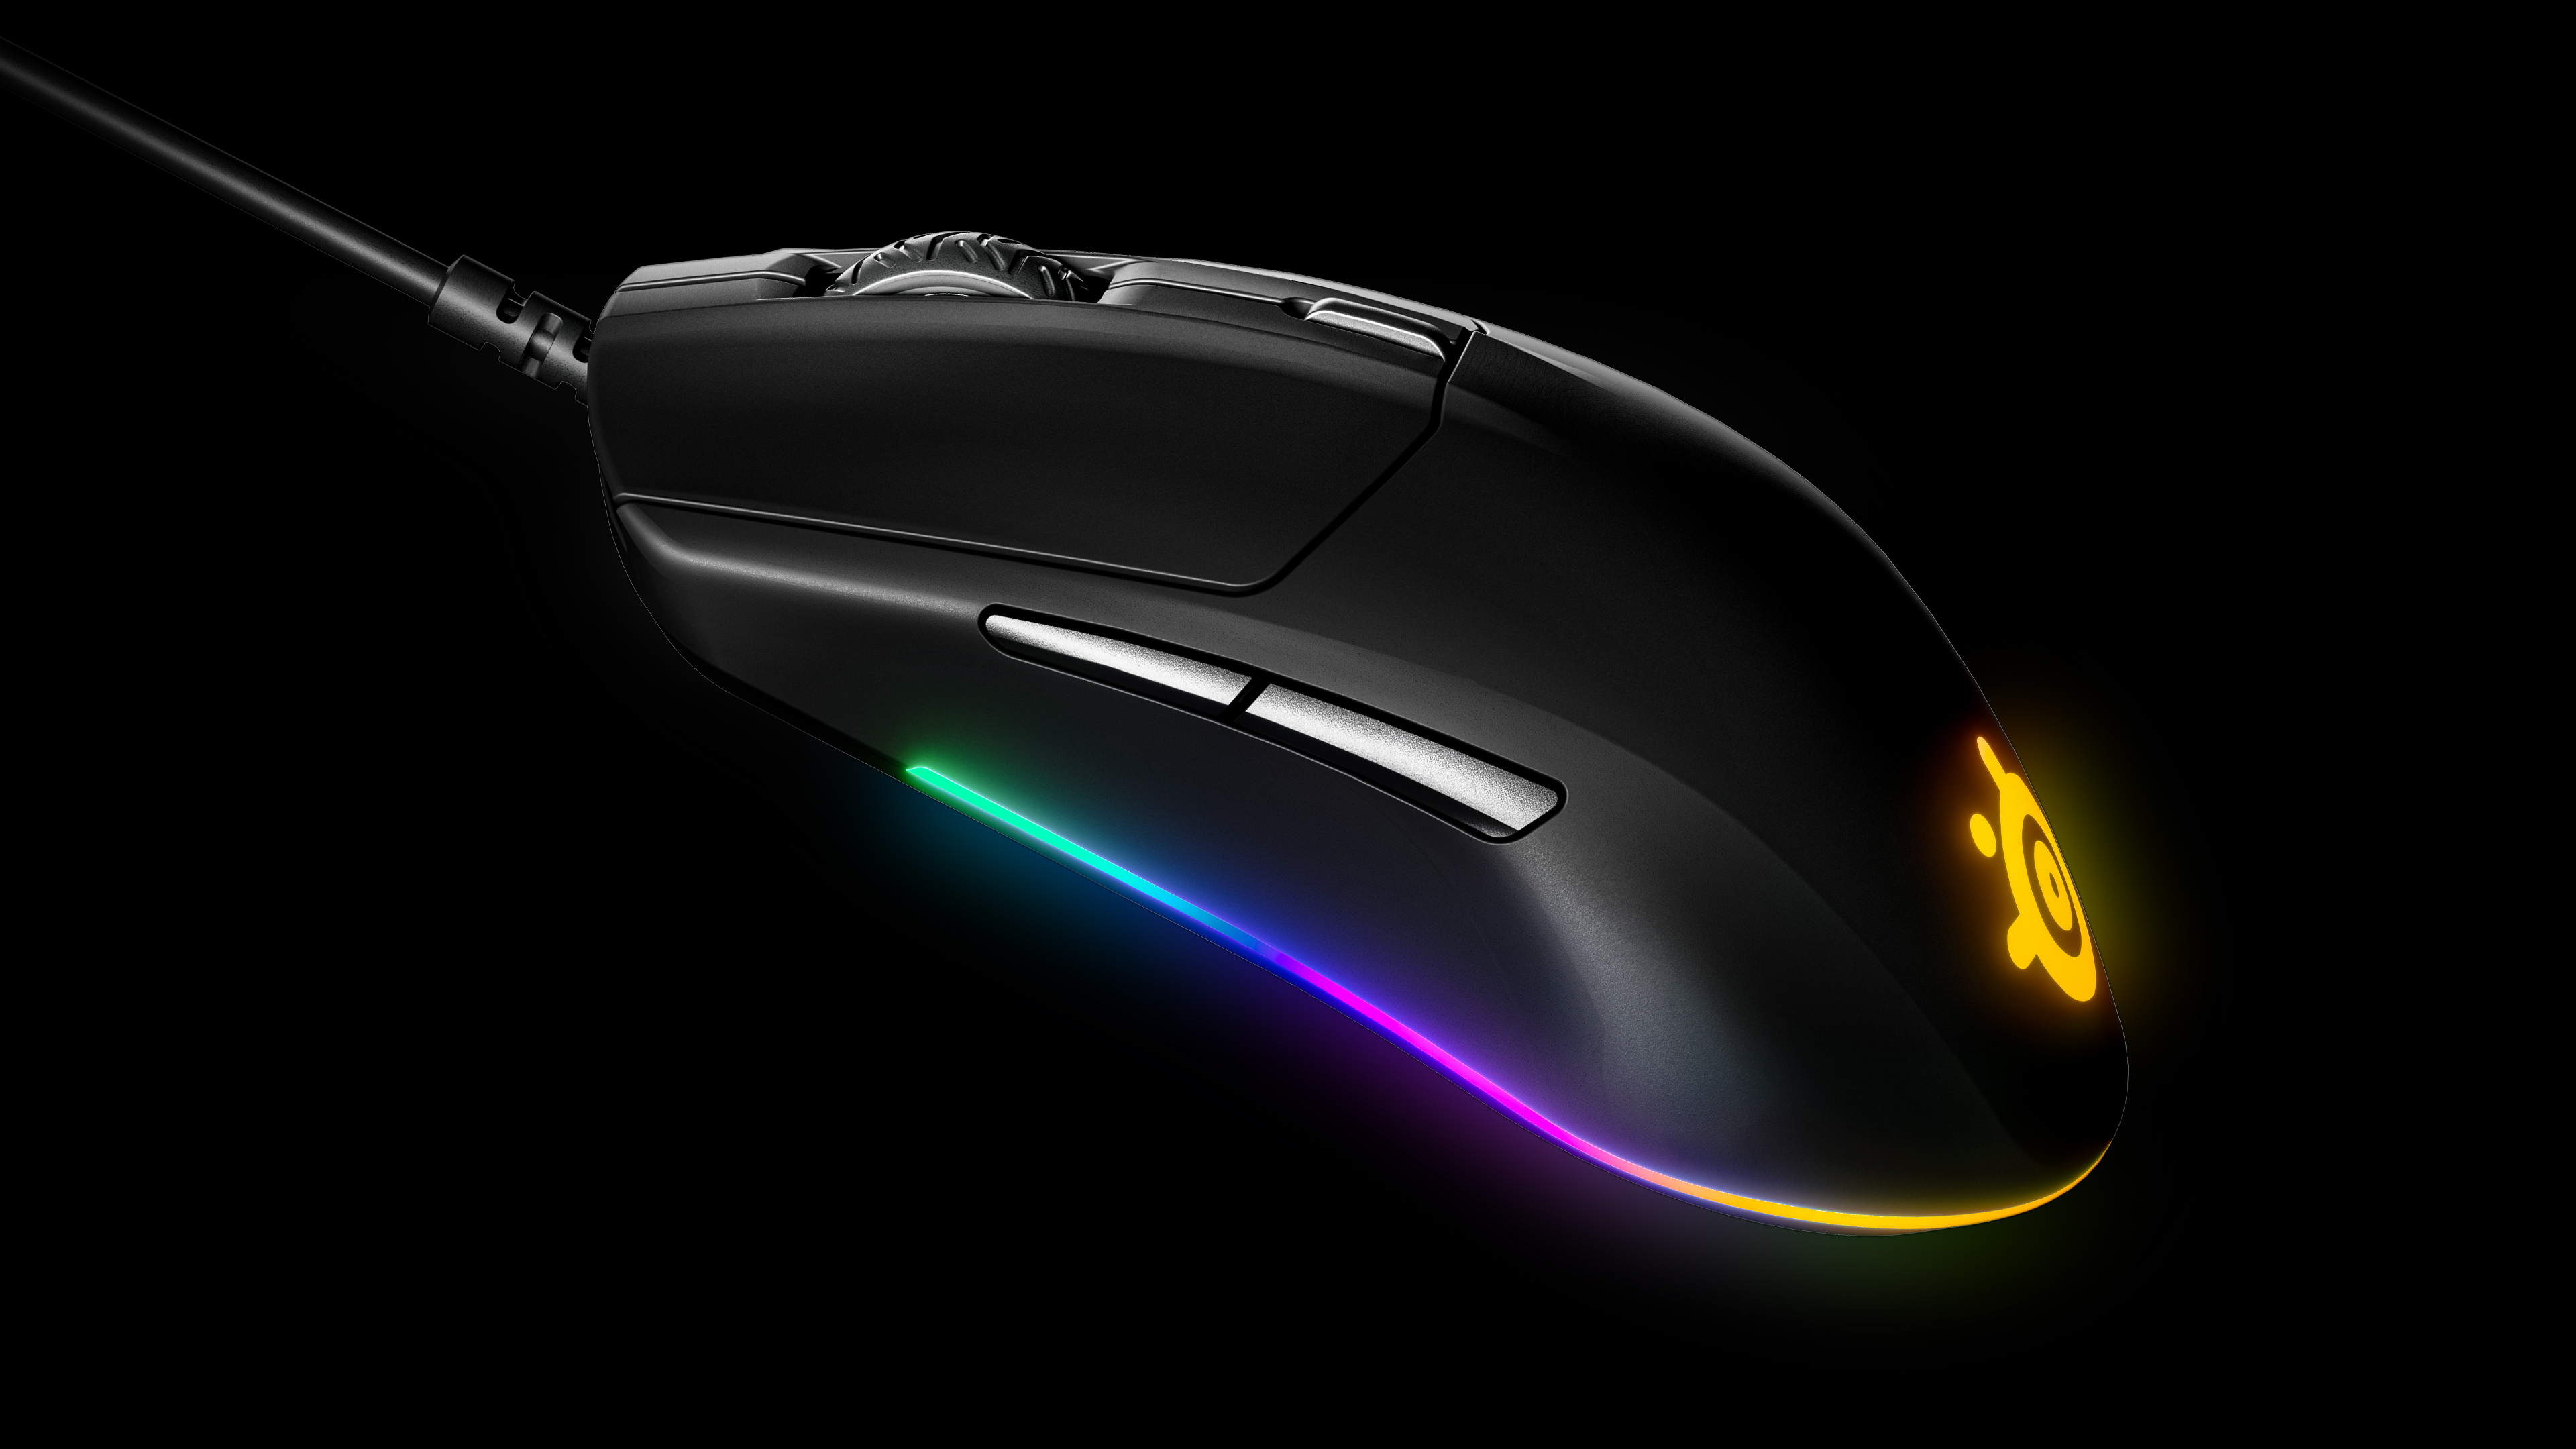 SteelSeries Launches Low-Cost Gaming Peripherals With 3 Gaming Mouse, Apex 3, and 5 Gaming Keyboards